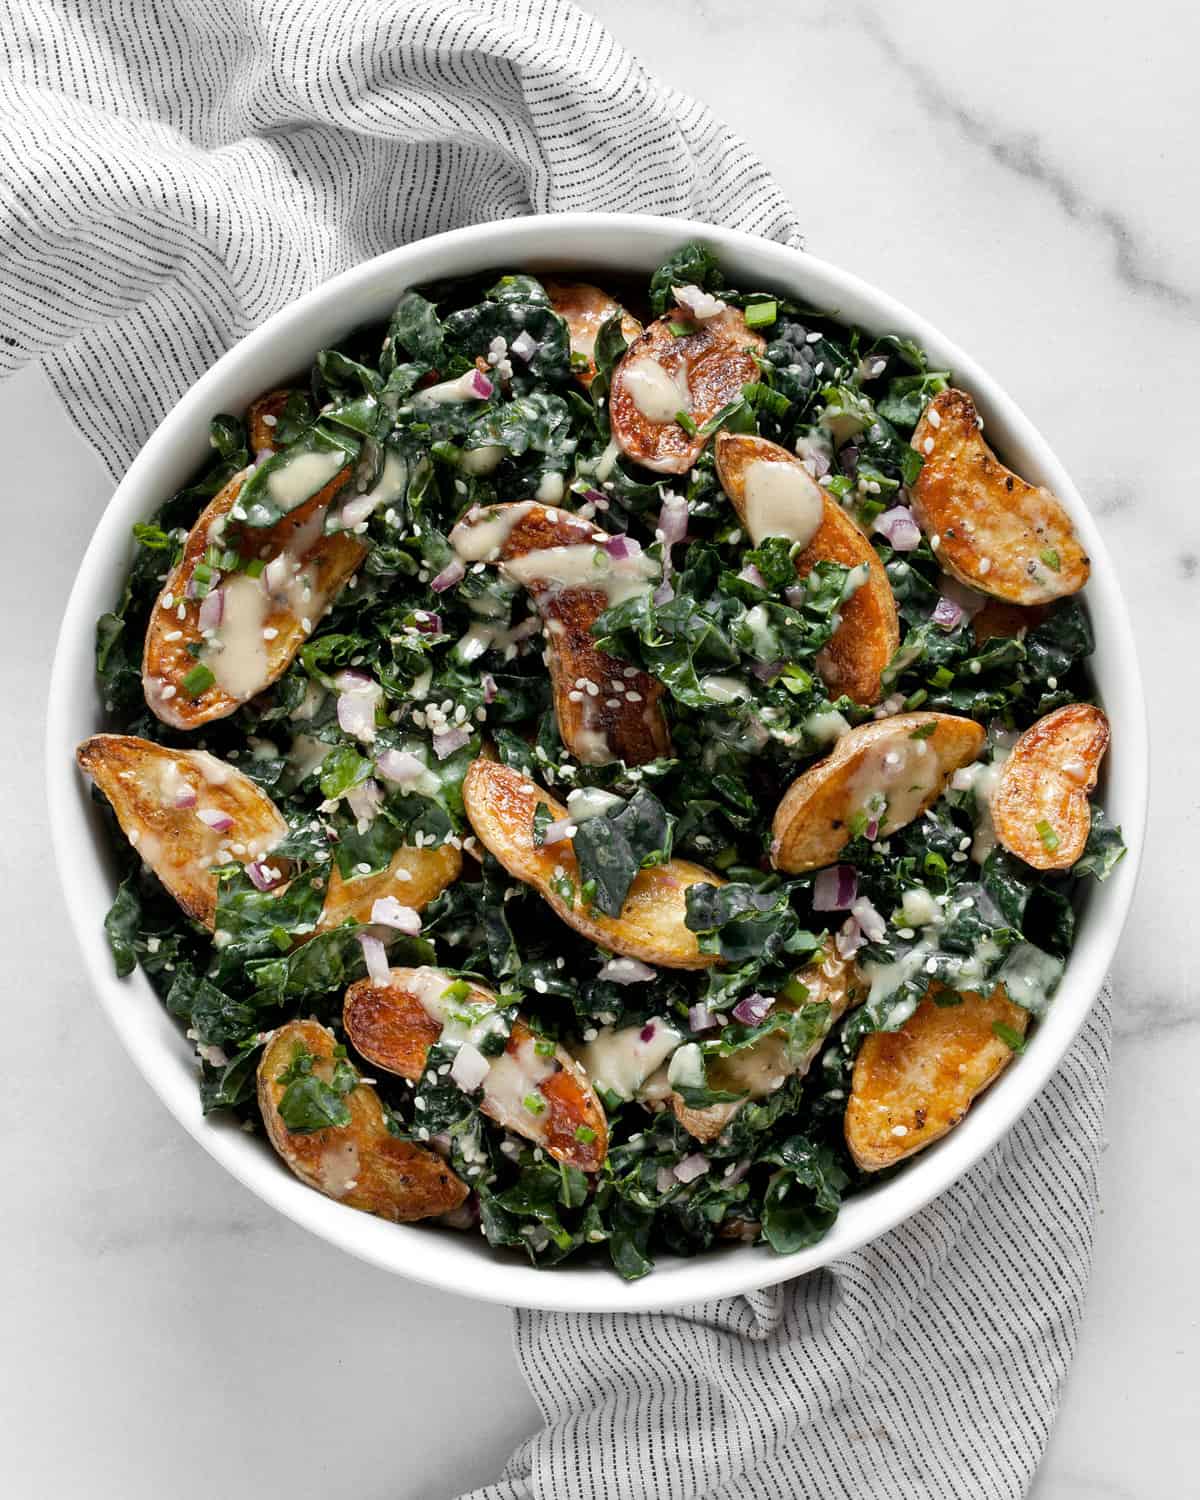 Roasted fingerling potato and kale salad in a bowl.